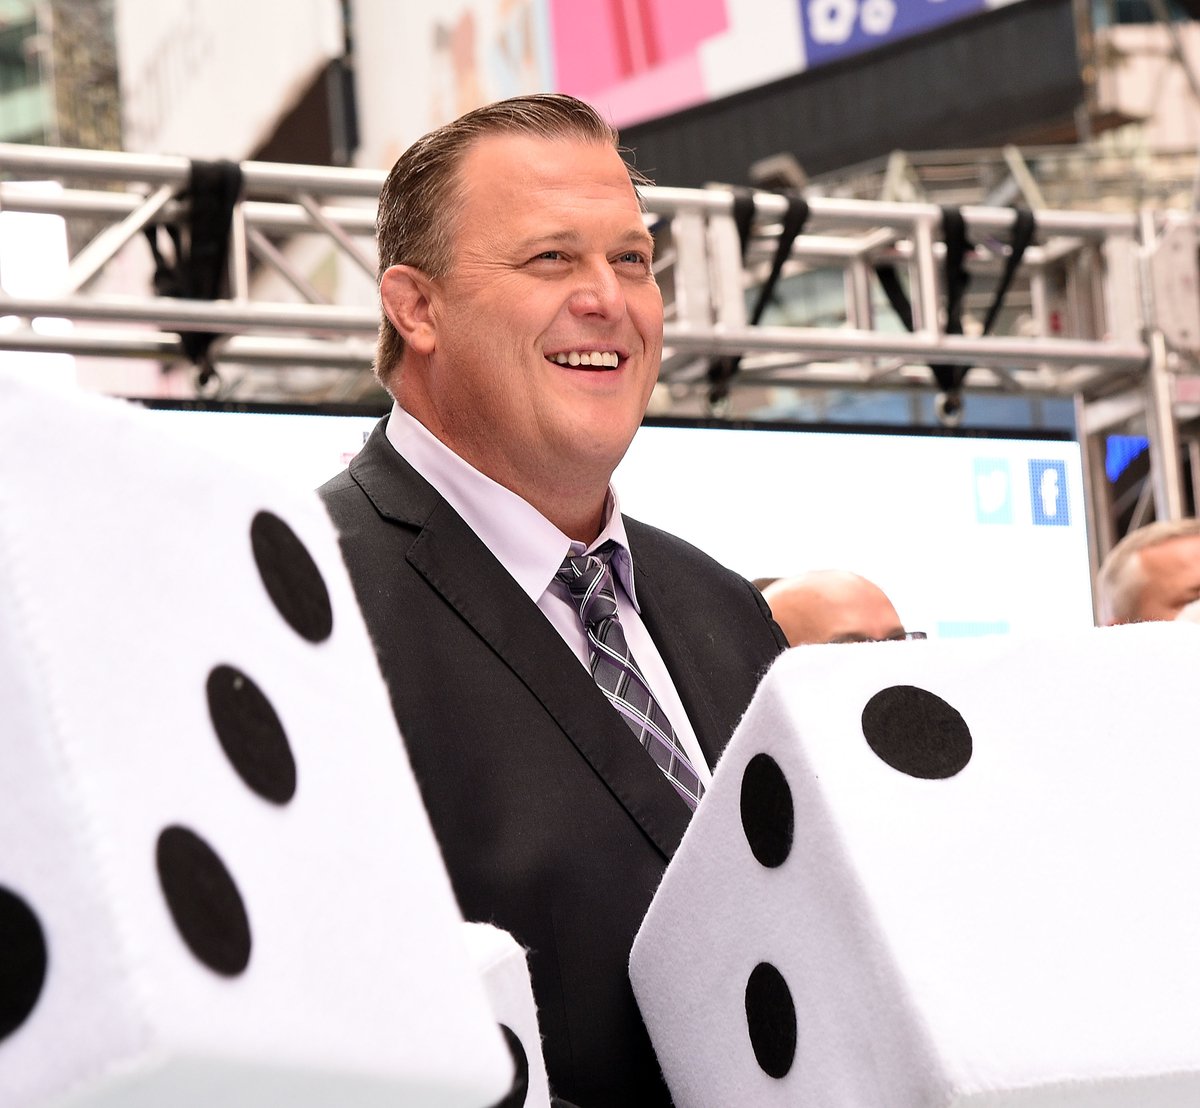 'Bob Hearts Abishola' actor Billy Gardell, who hosted 'Monopoly Millionaires Club' with Bob Barker mentoree Todd Newton